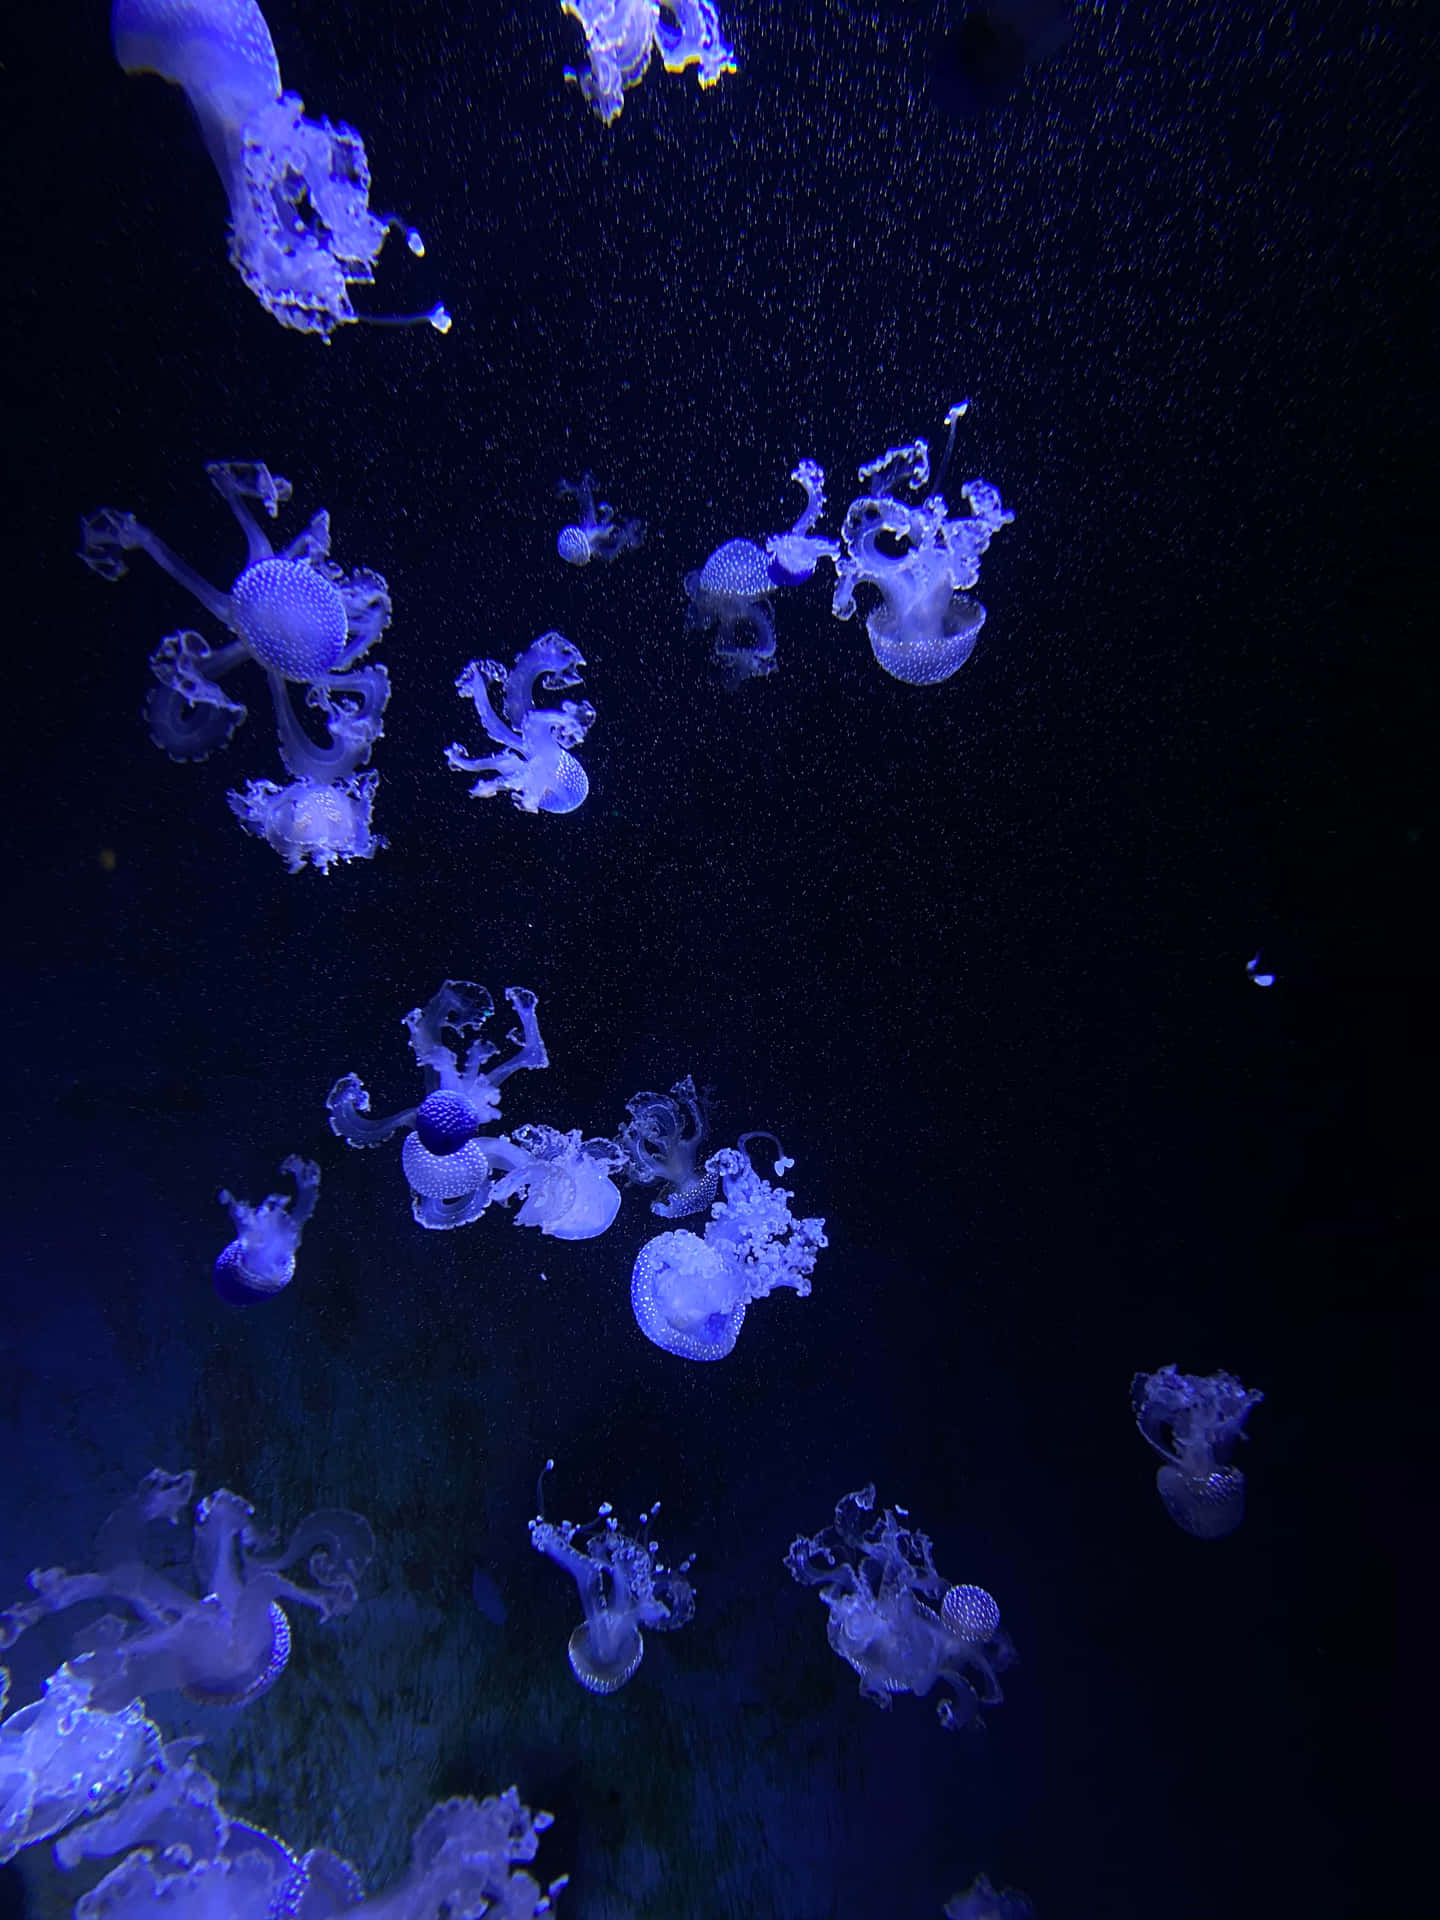 A peaceful getaway in your pocket - enjoy an Aquarium right on your Iphone! Wallpaper